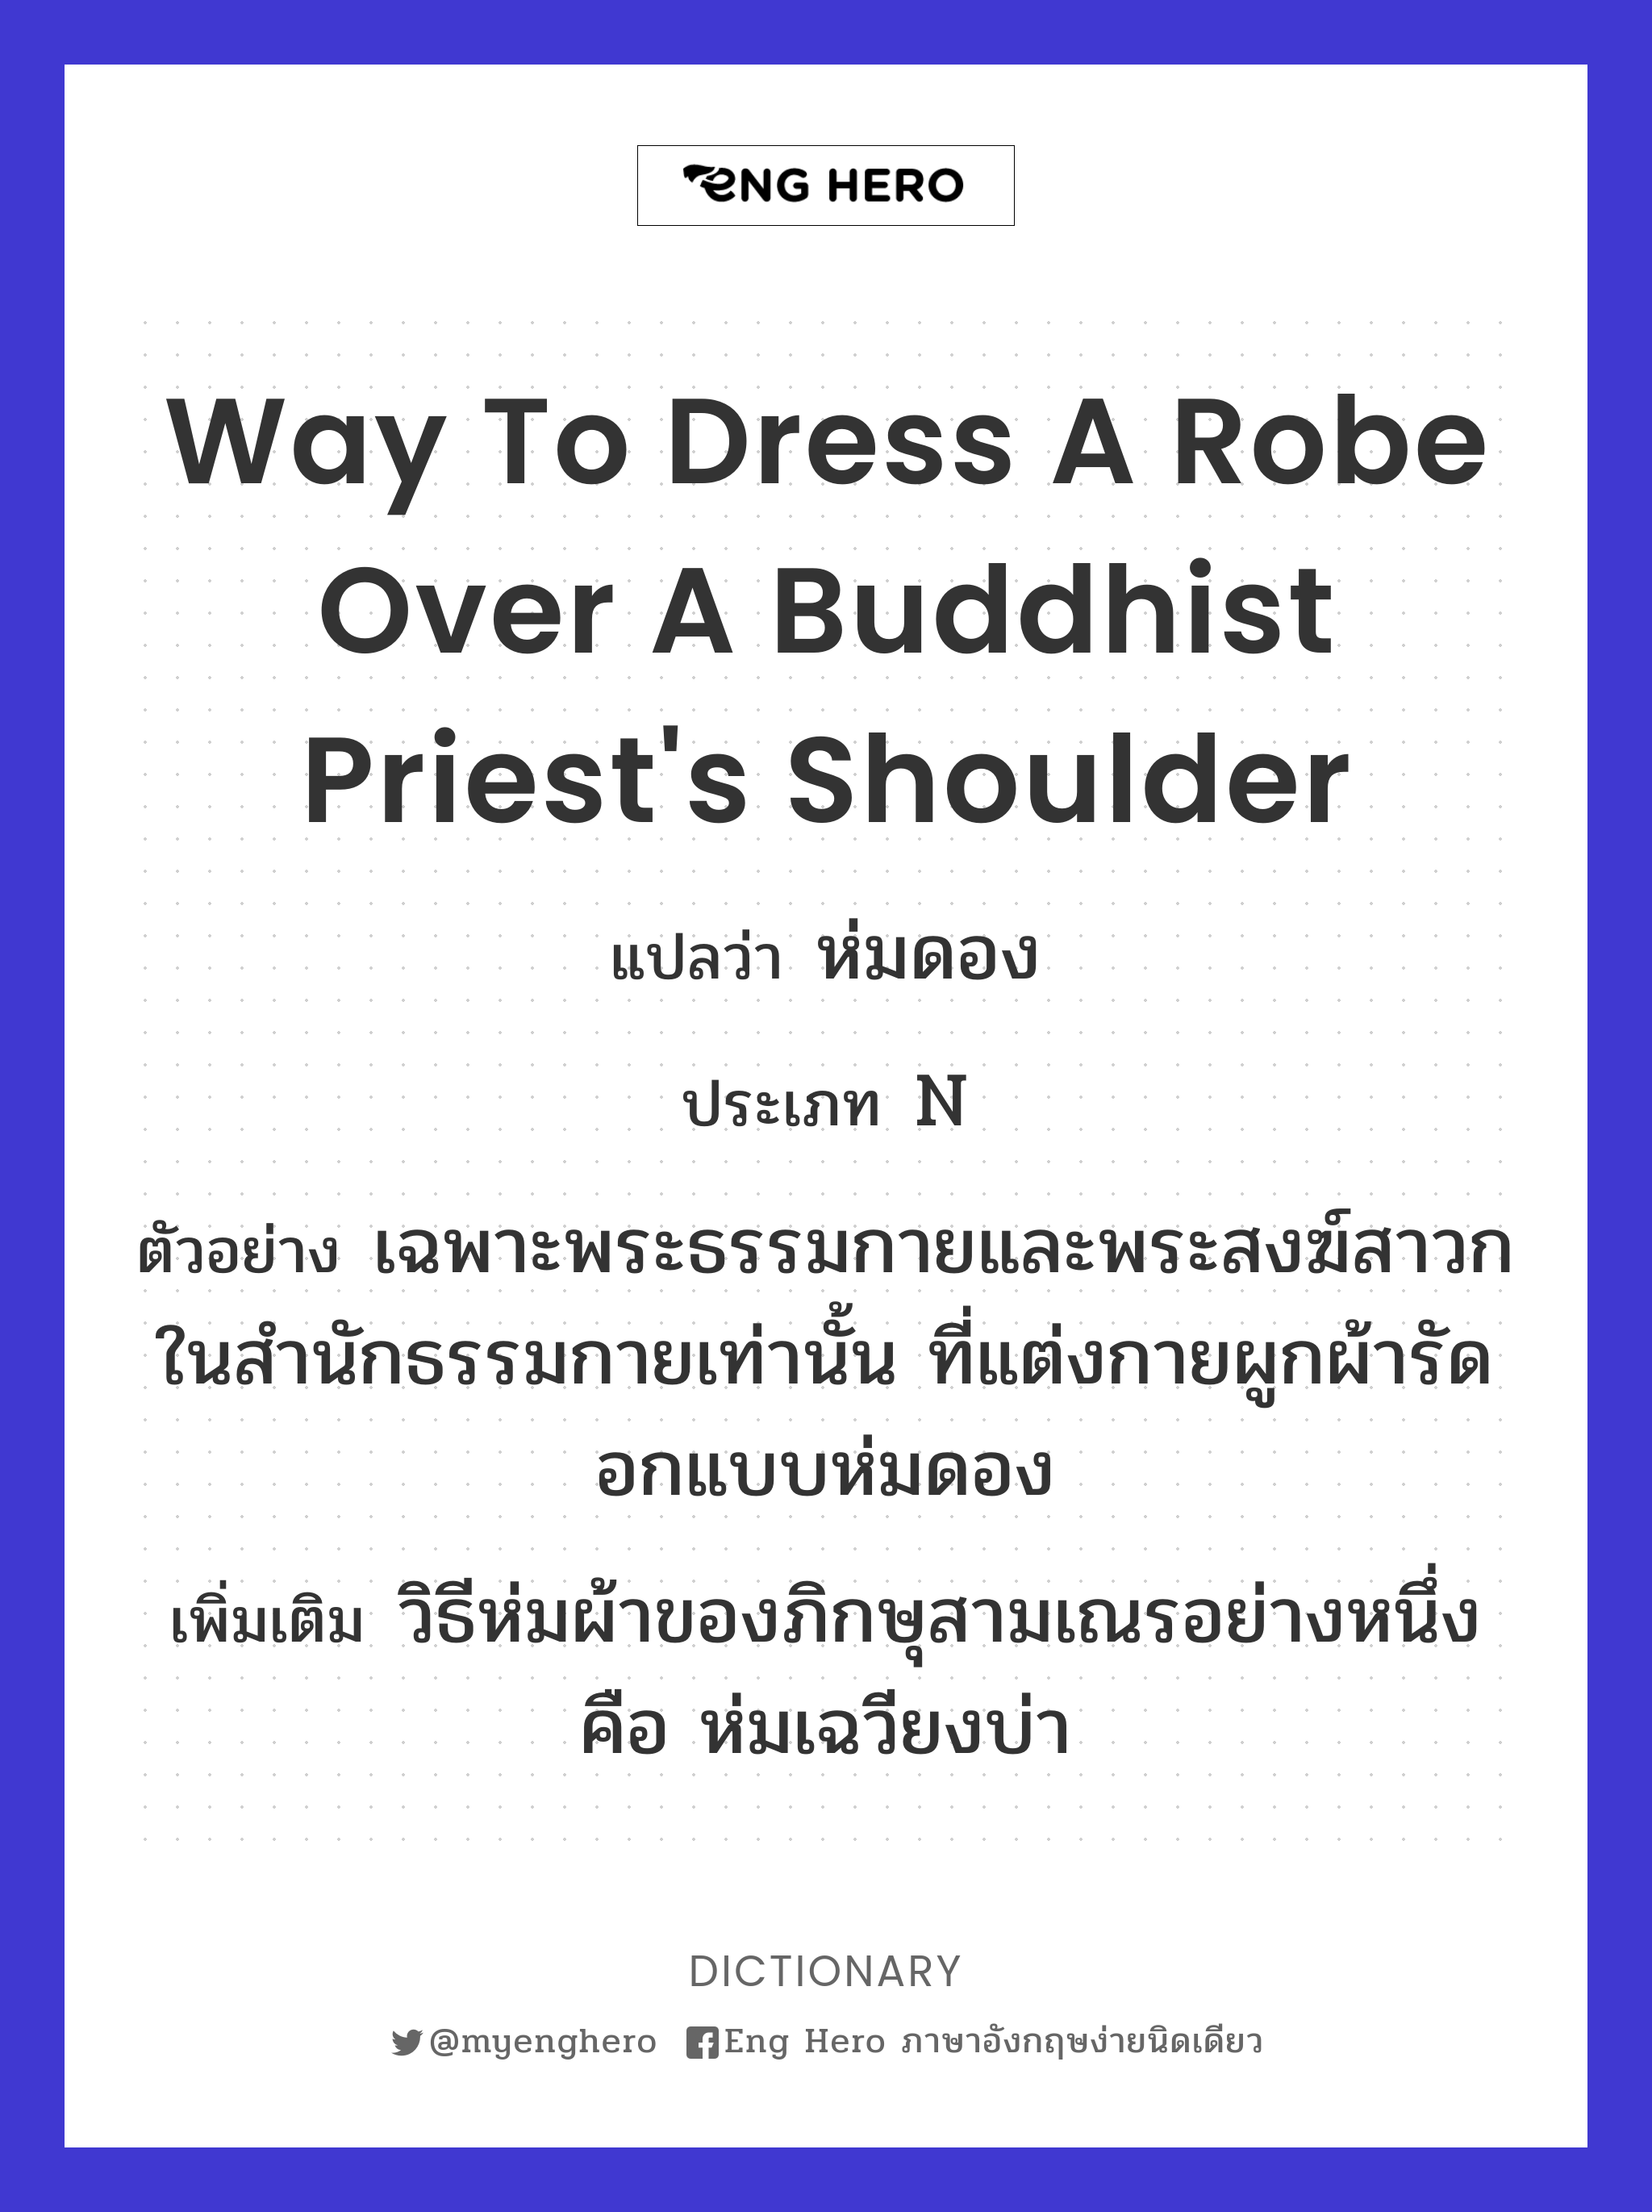 way to dress a robe over a Buddhist priest's shoulder